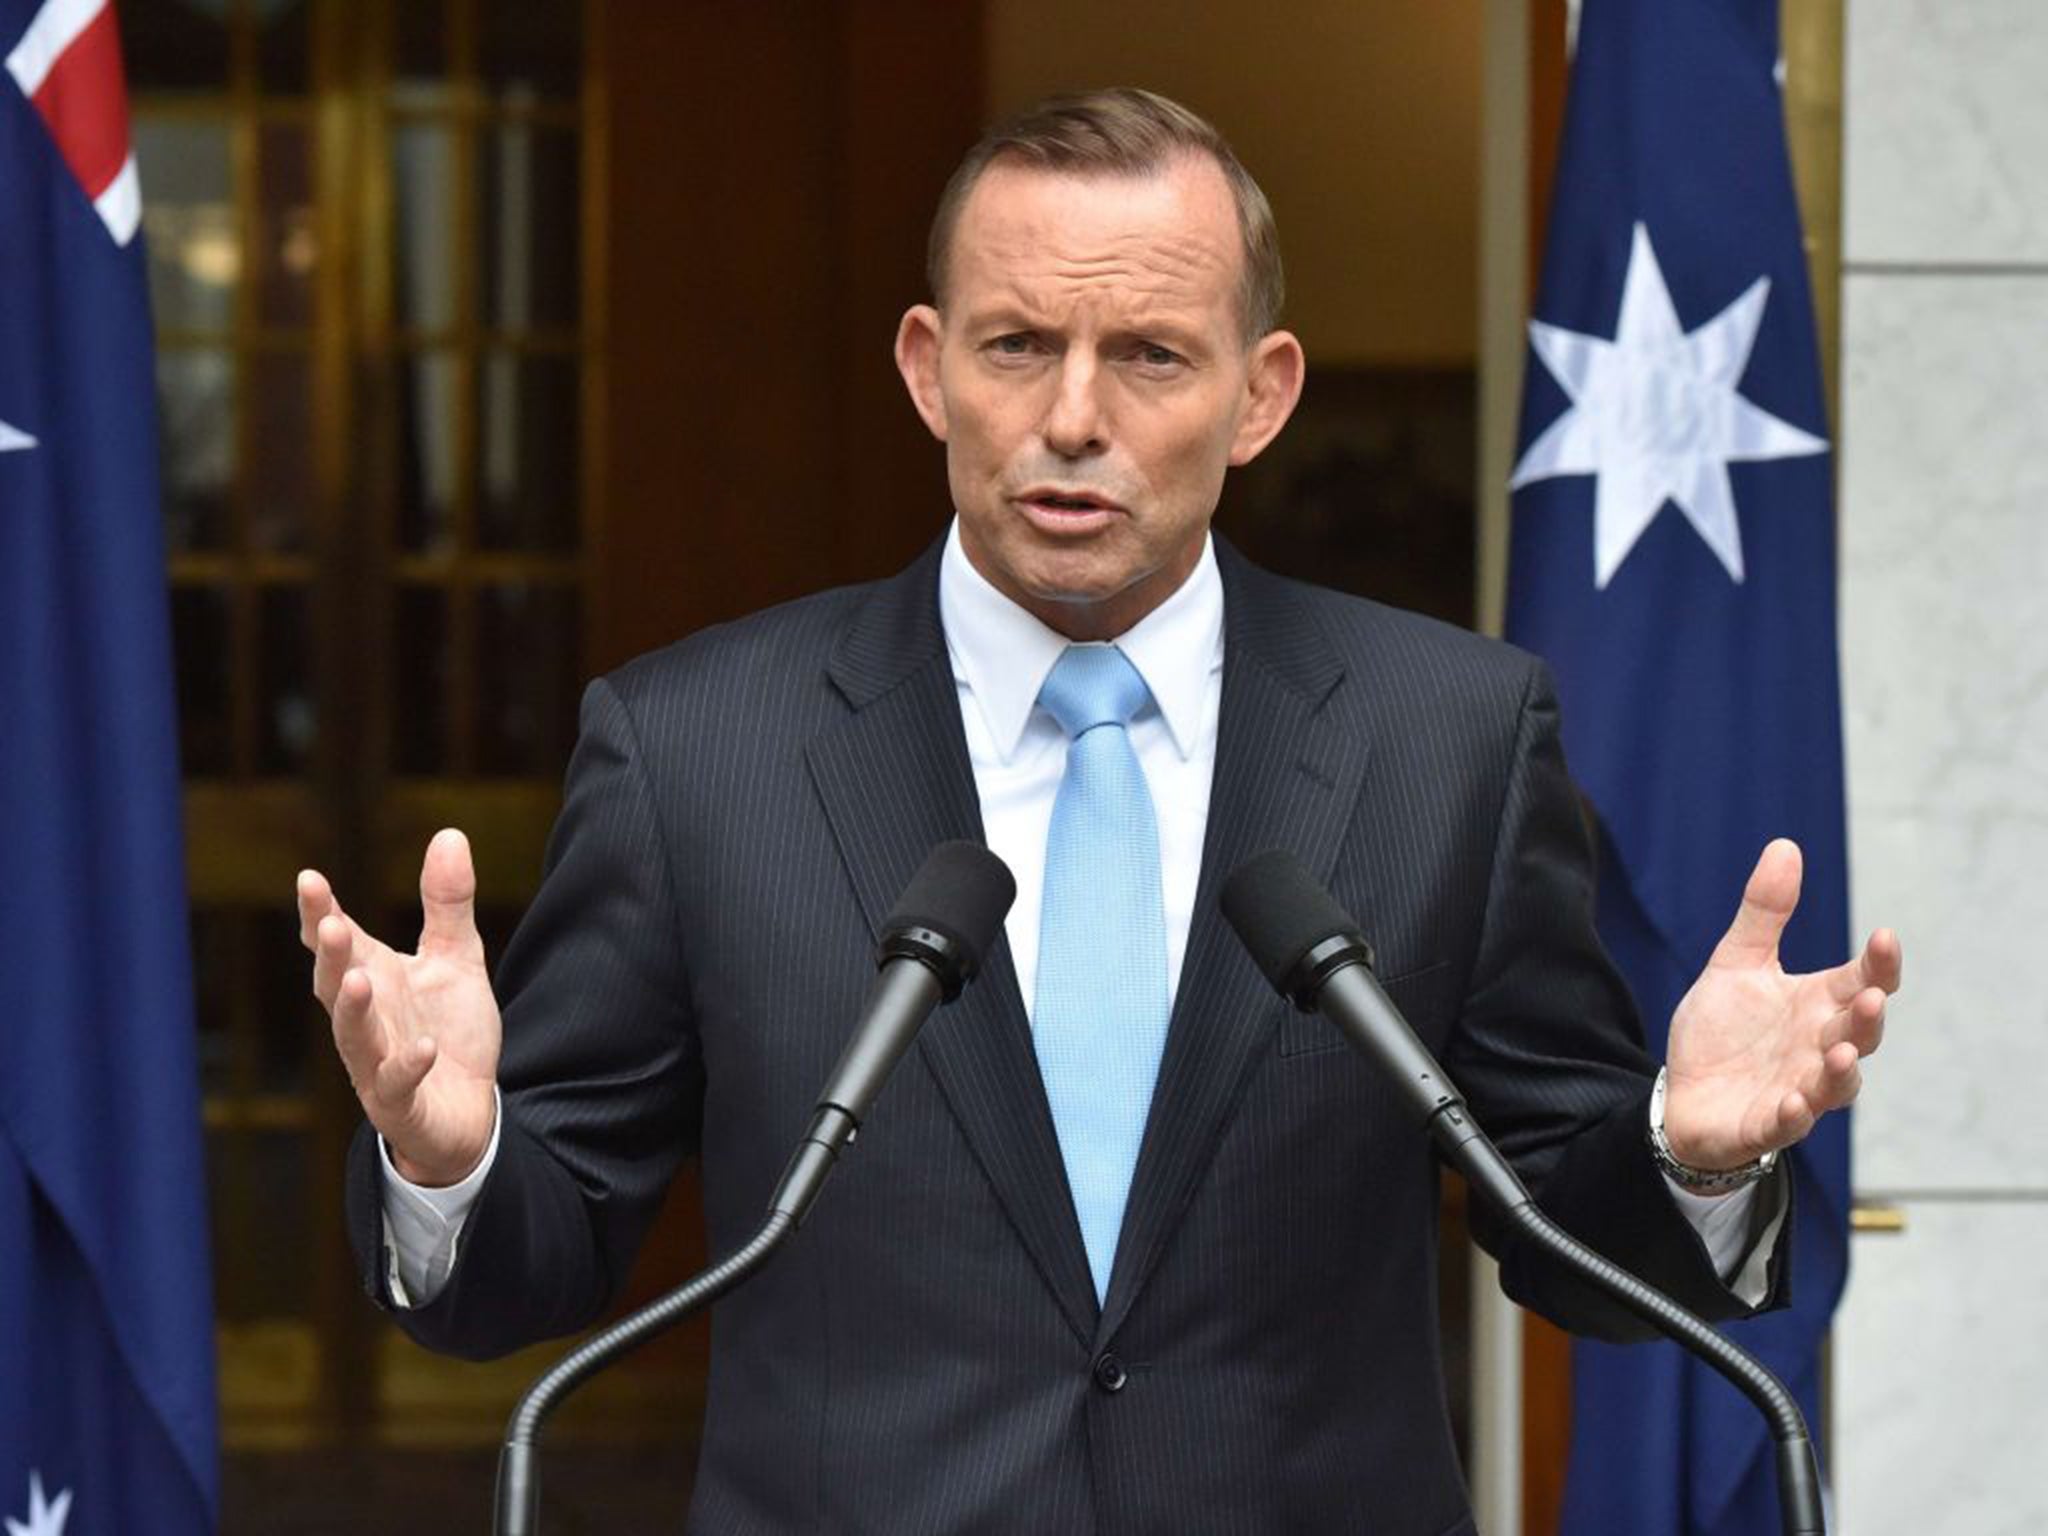 Tony Abbott says he is chastened by the experience